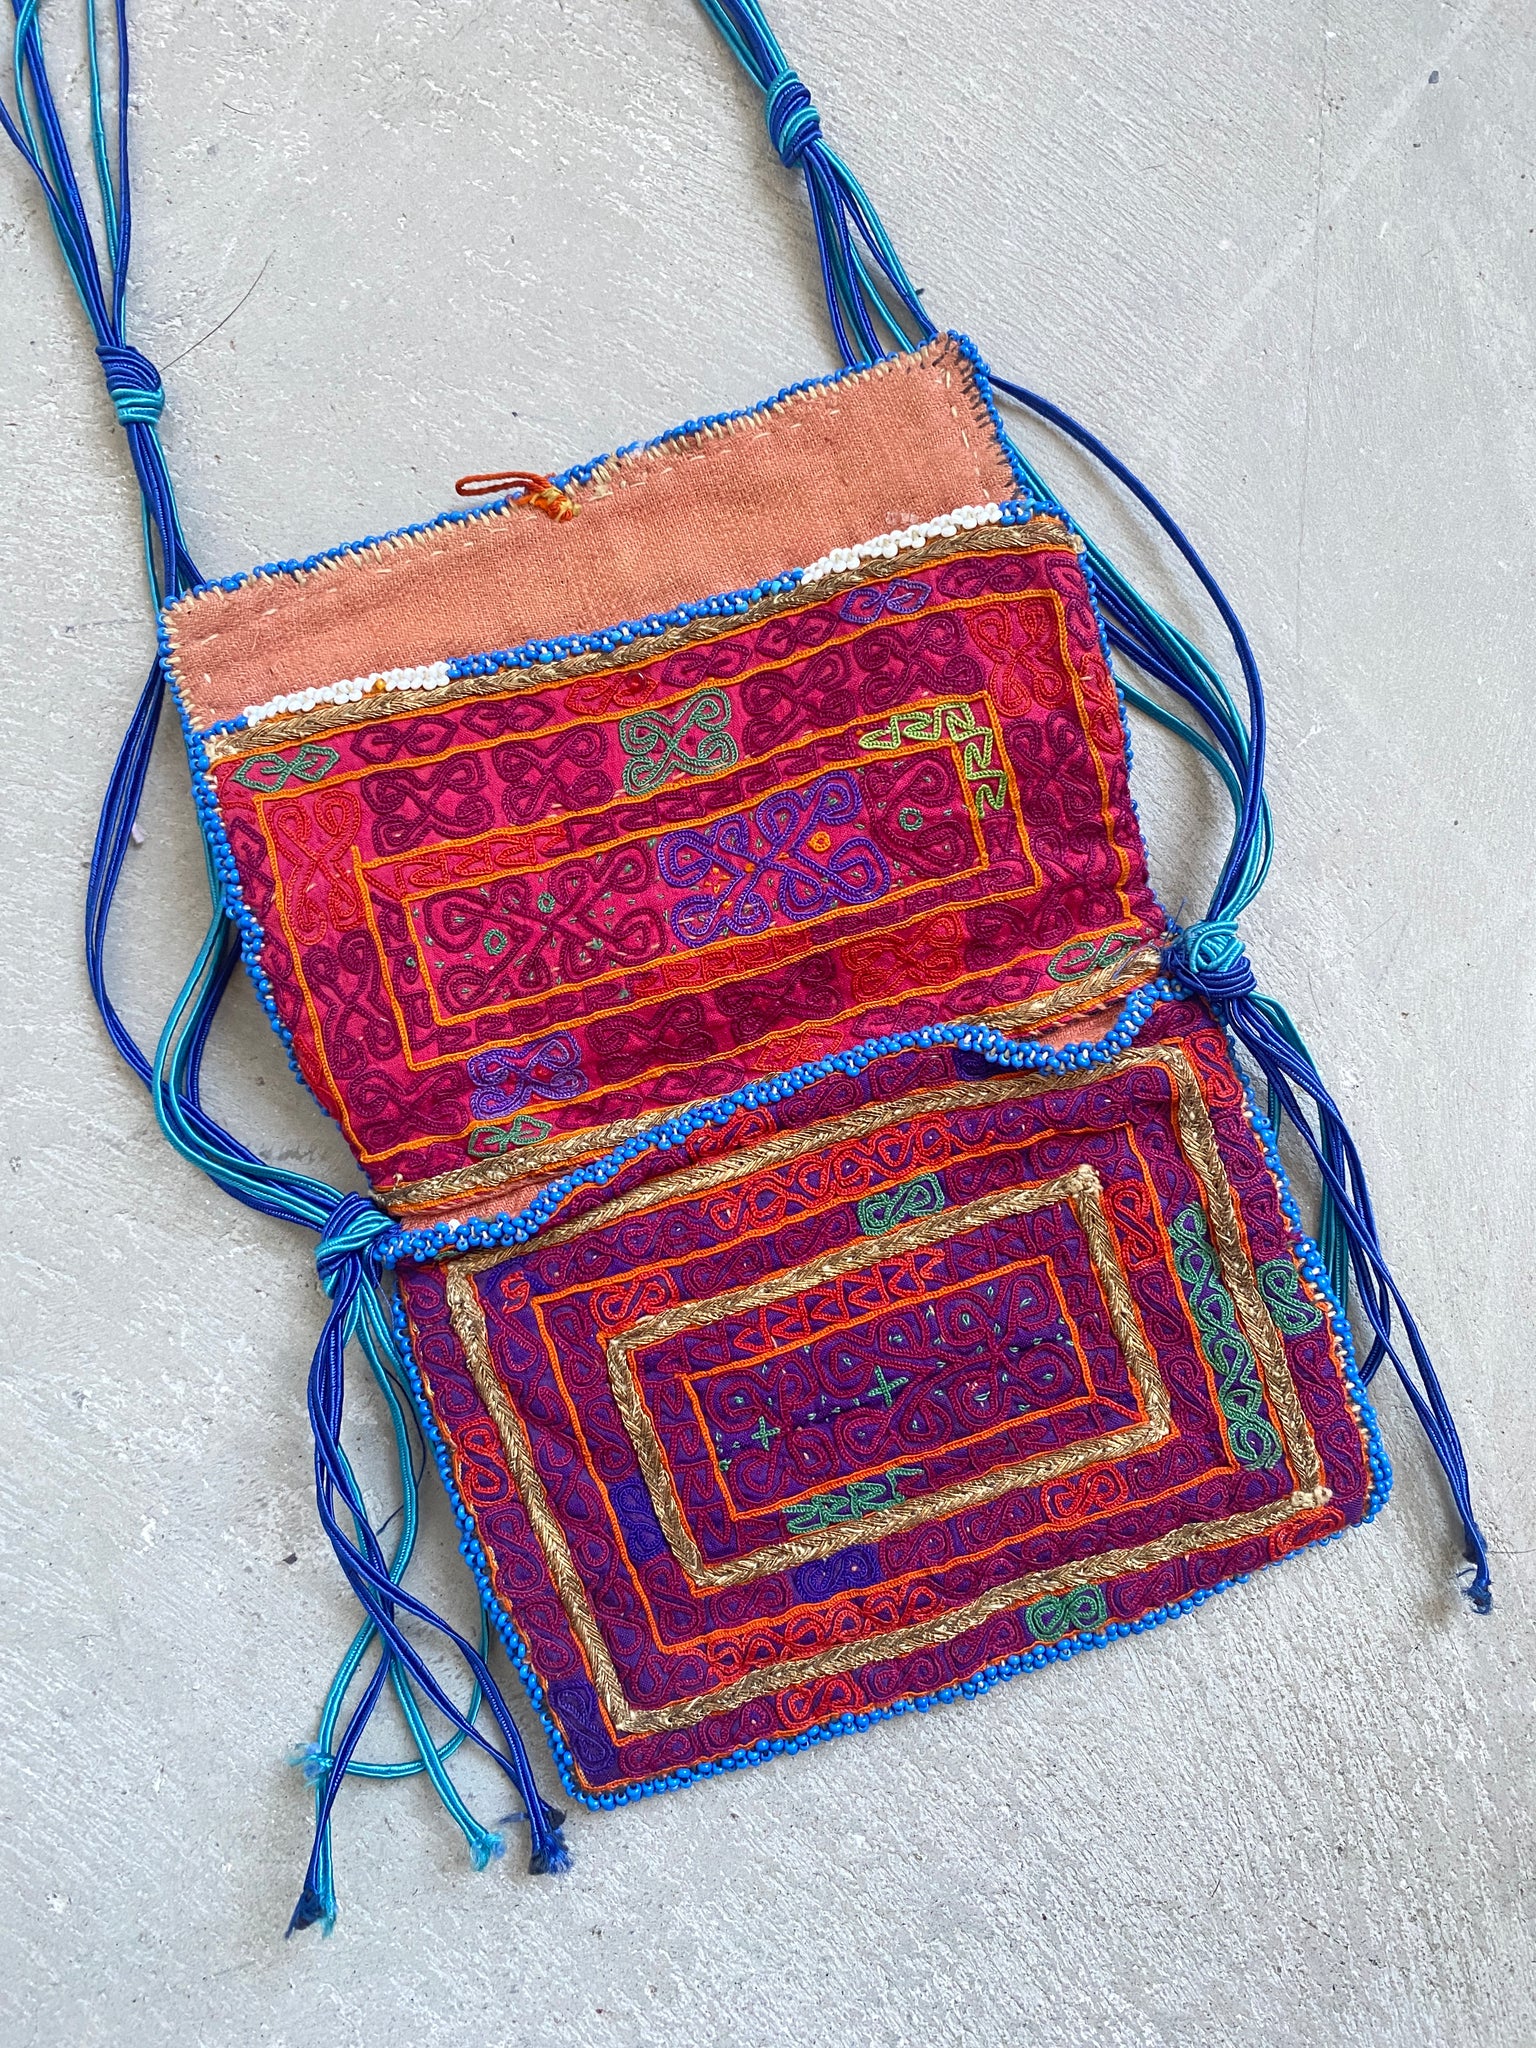 Small Vintage Embroidered Bag